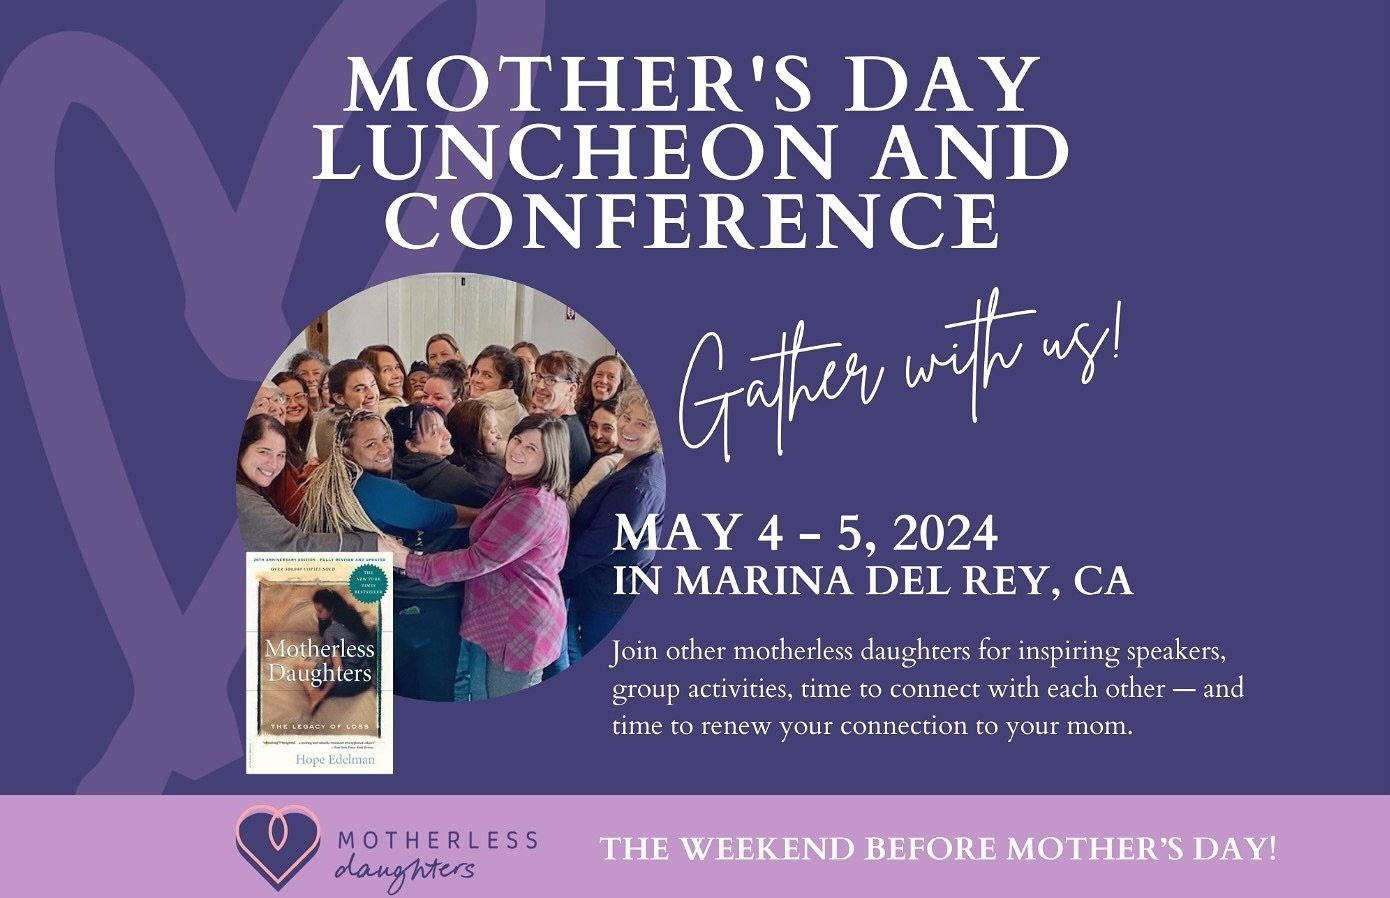 On May 4, join @owenelliot1967 for a pre-Mother&rsquo;s Day luncheon and gathering in Marina Del Rey, CA. The event will celebrate 30 years of the powerful book MOTHERLESS DAUGHTERS by @hope_edelman, and Owen will discuss her forthcoming memoir title